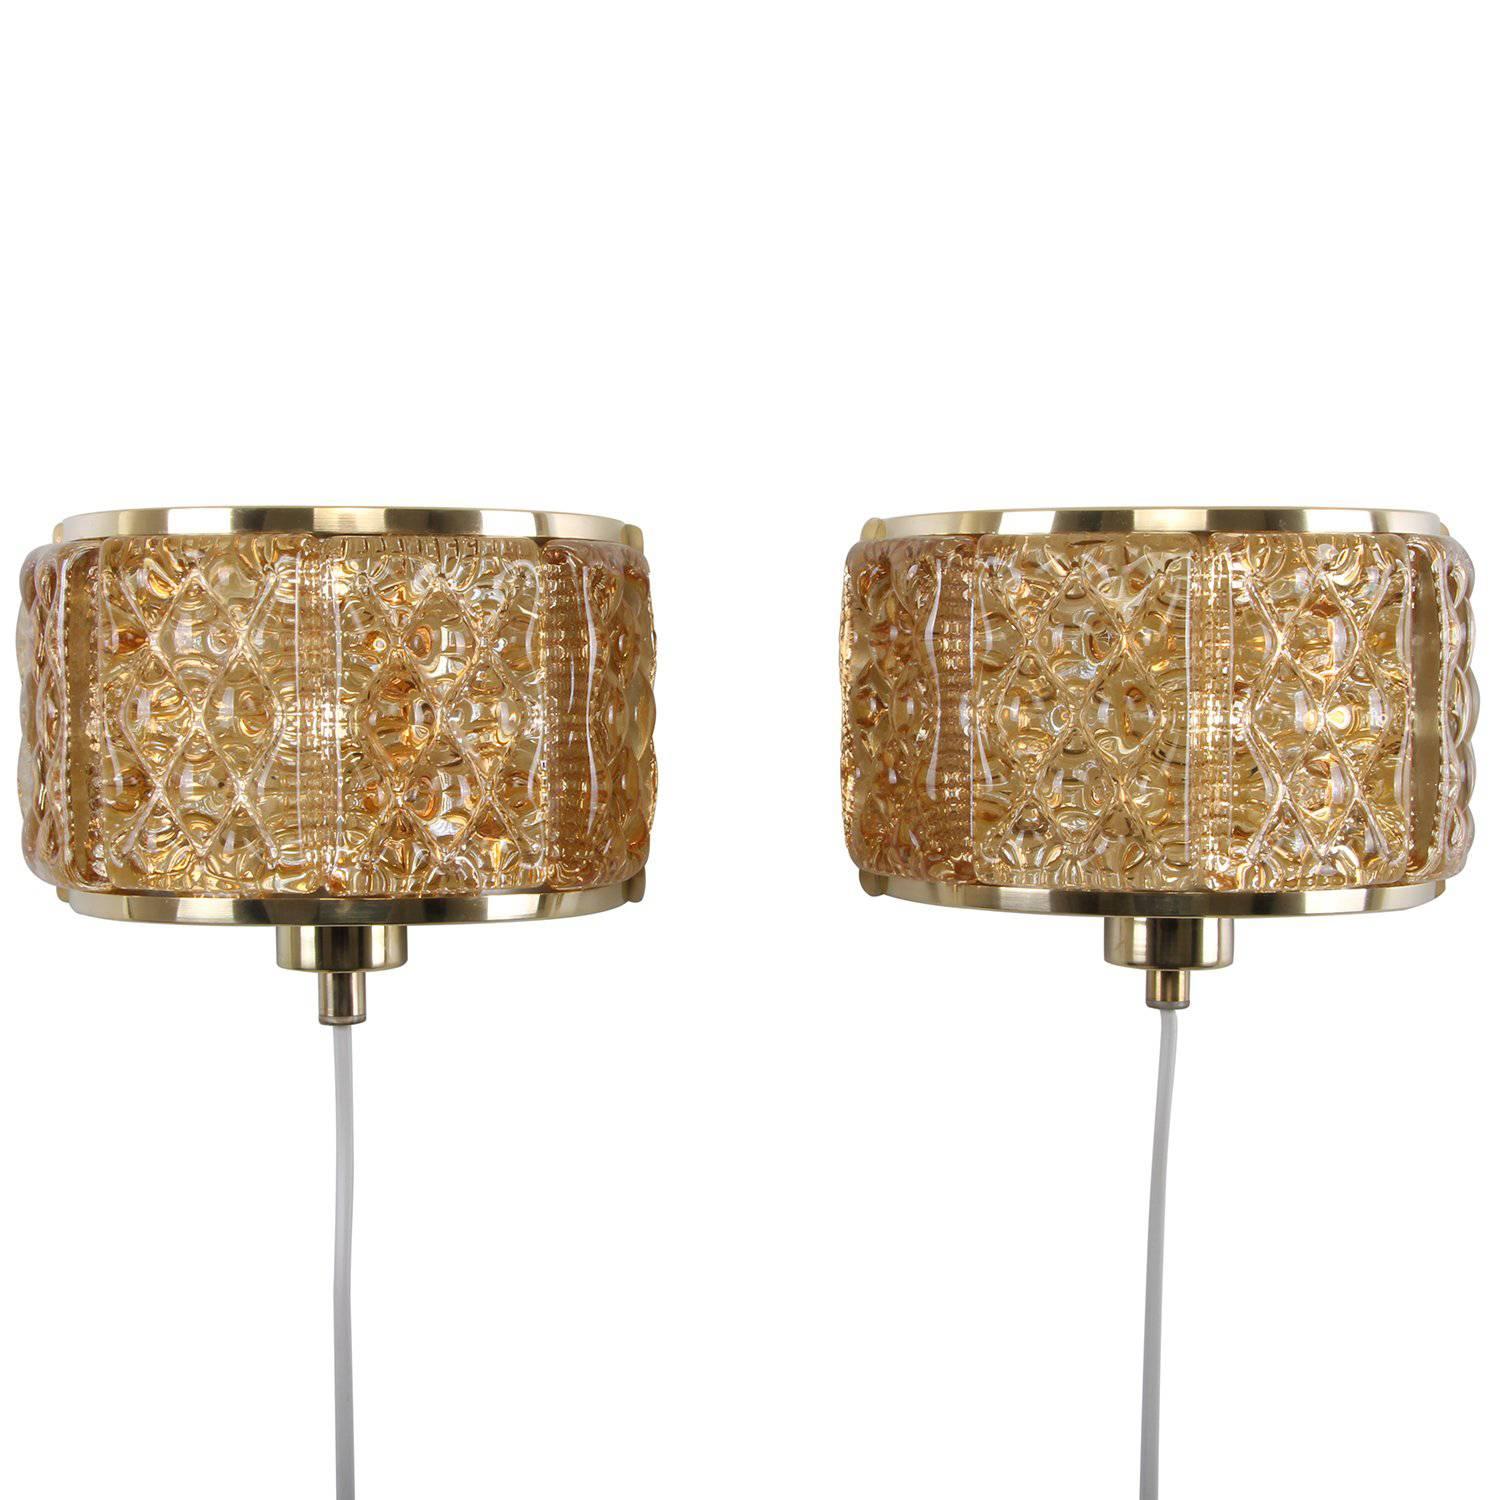 Gallalampet, Pair of Sconces by Vitrika, 1970s, Brass & Golden Glass Wall Lamps For Sale